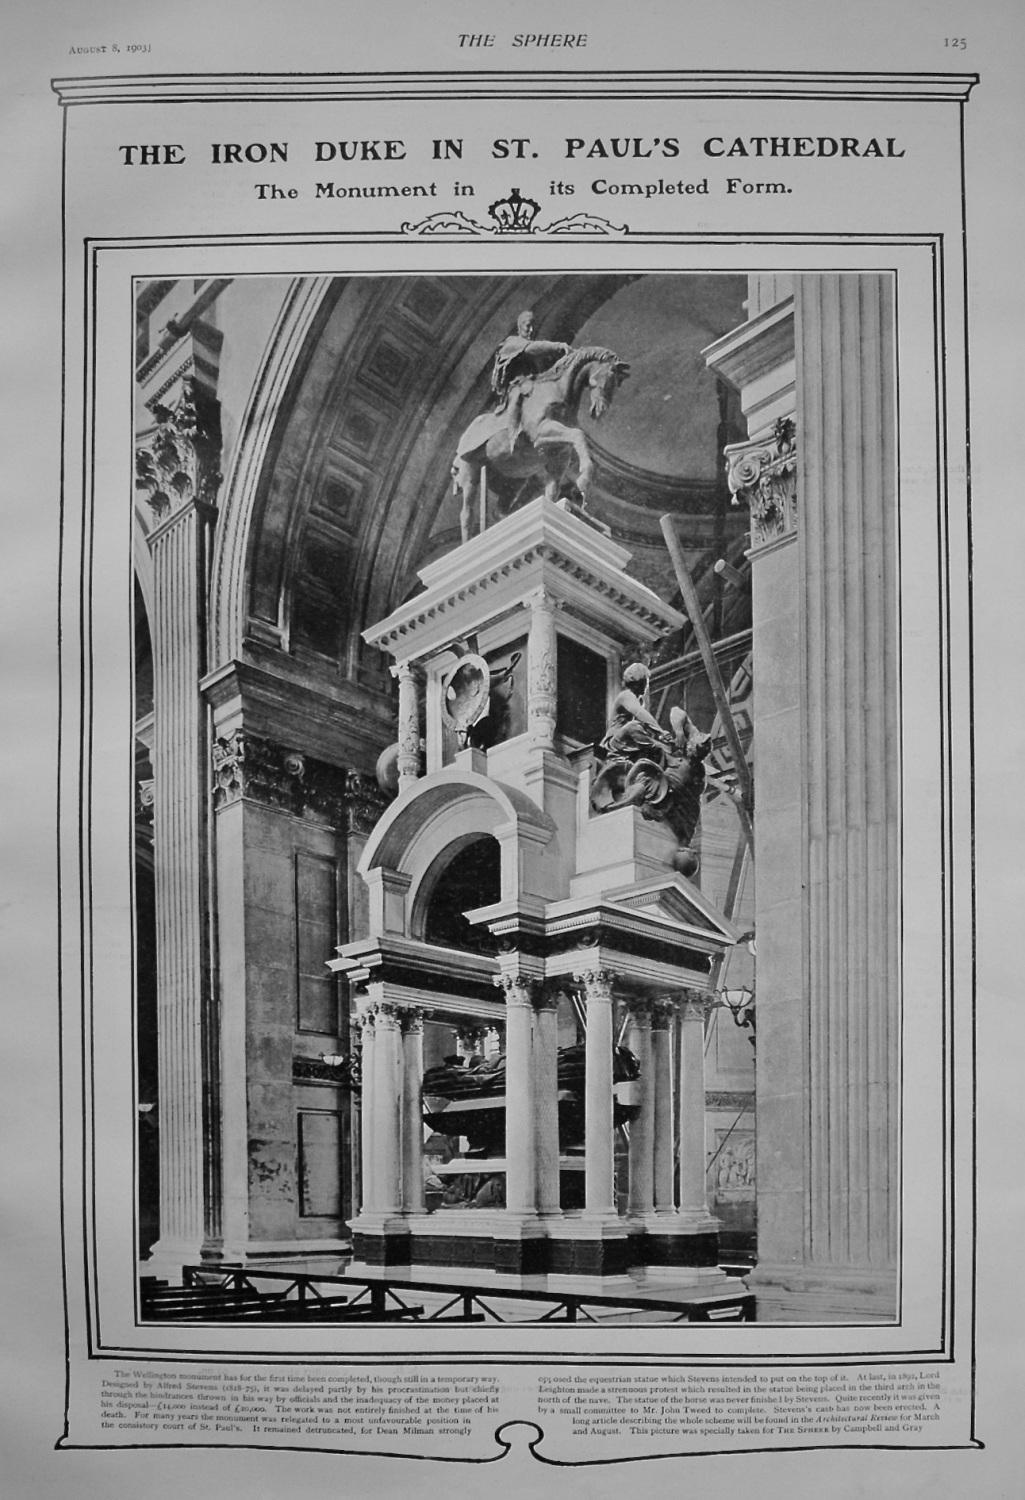 The Iron Duke in St. Paul's Cathedral : The Monument in its Completed Form.